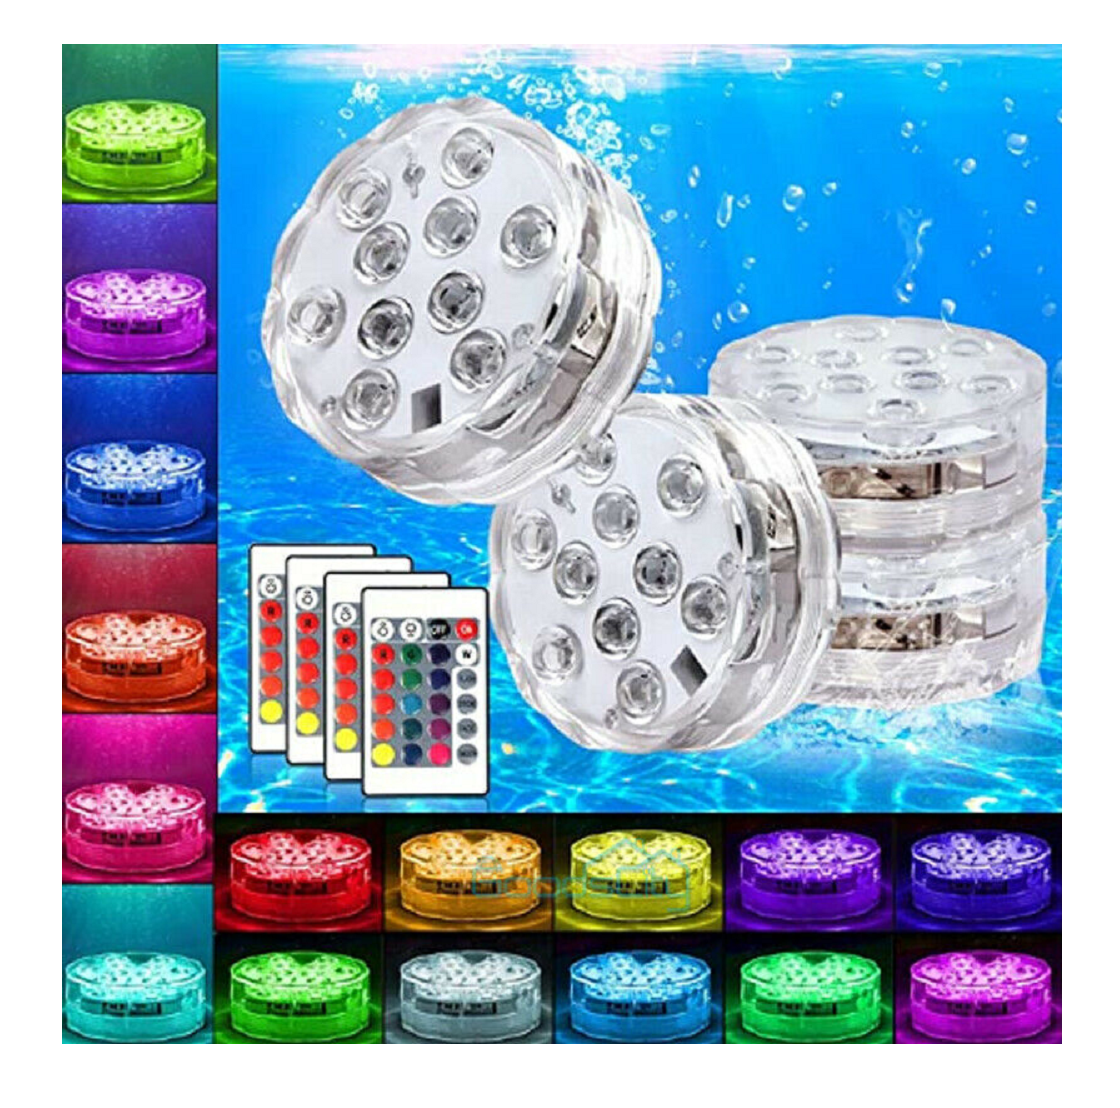 4 Piece Waterproof Underwater Led Lights with remote for Swimming Pool Hot tube 